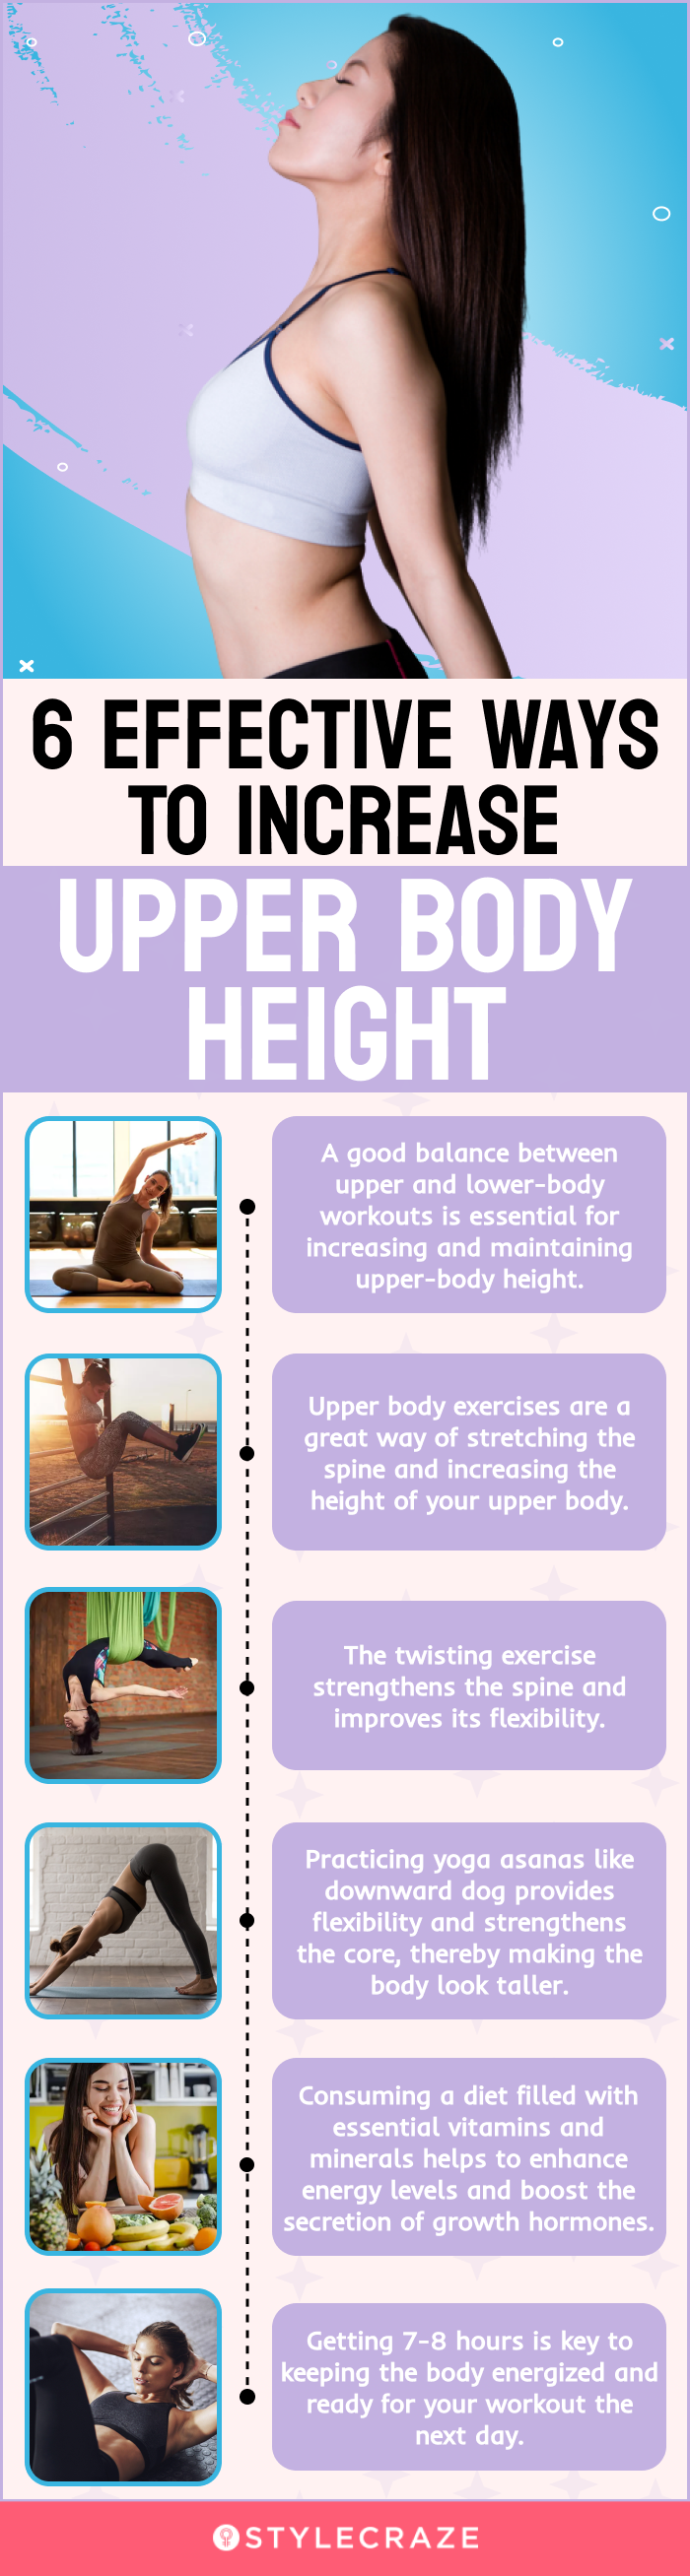 6 effective ways to increase upper body height (infographic)